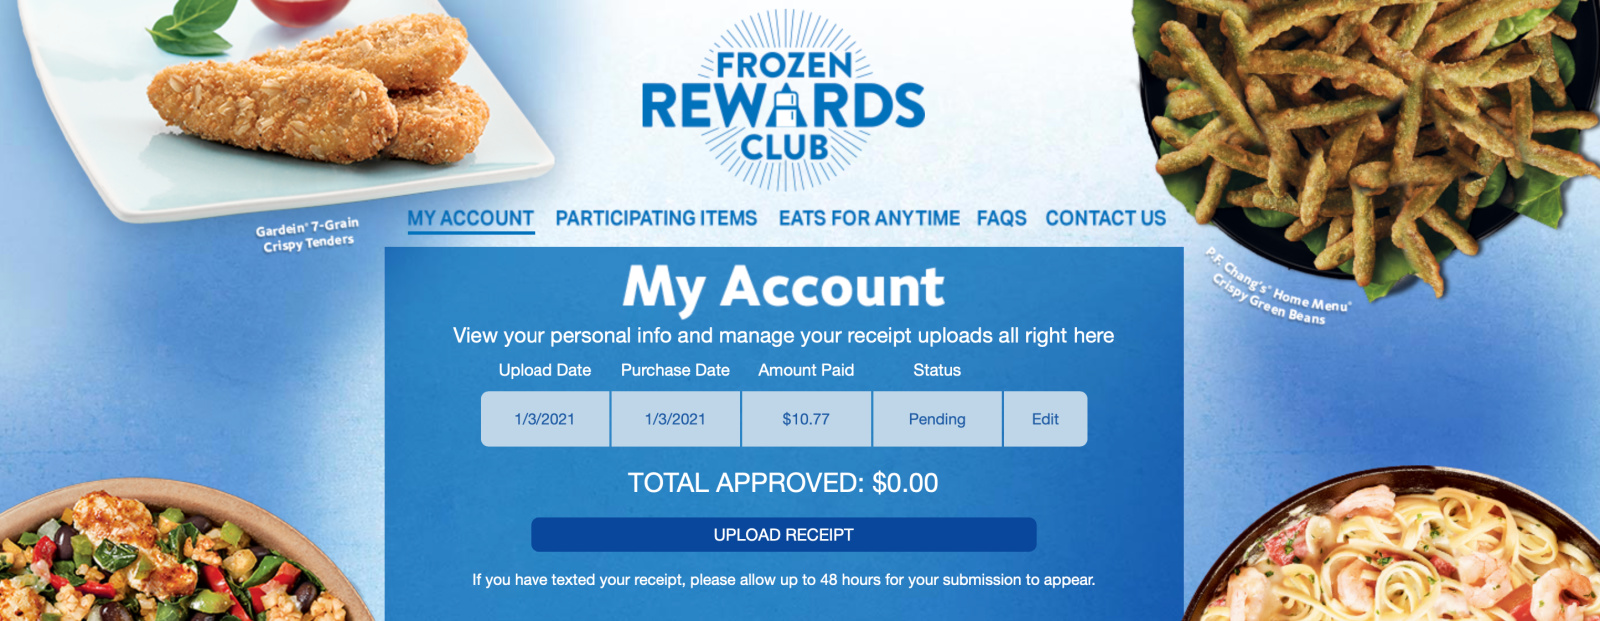 The Frozen Rewards Club Has Returned For 2021 - Earn Up To $50 In Publix Gift Cards! on I Heart Publix